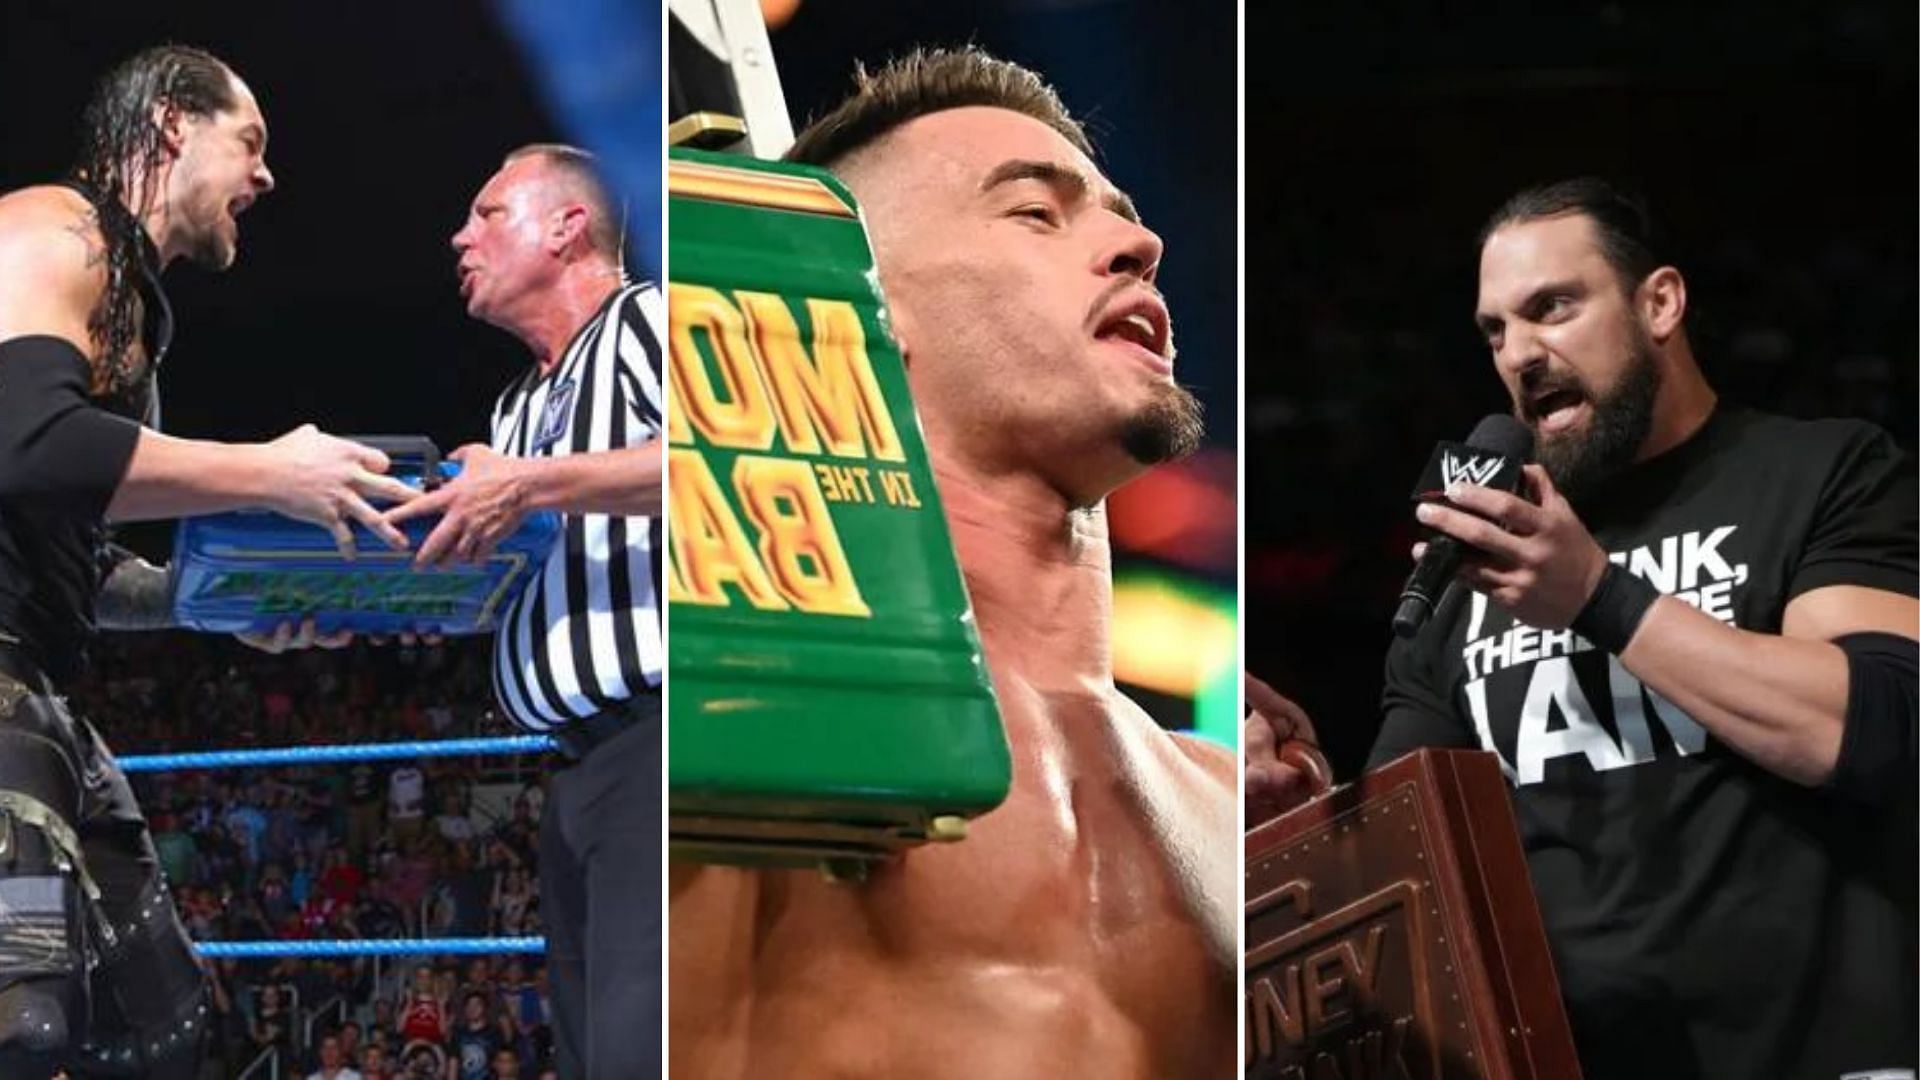 Some of the winners and how they were booked killed the aura of the briefcase